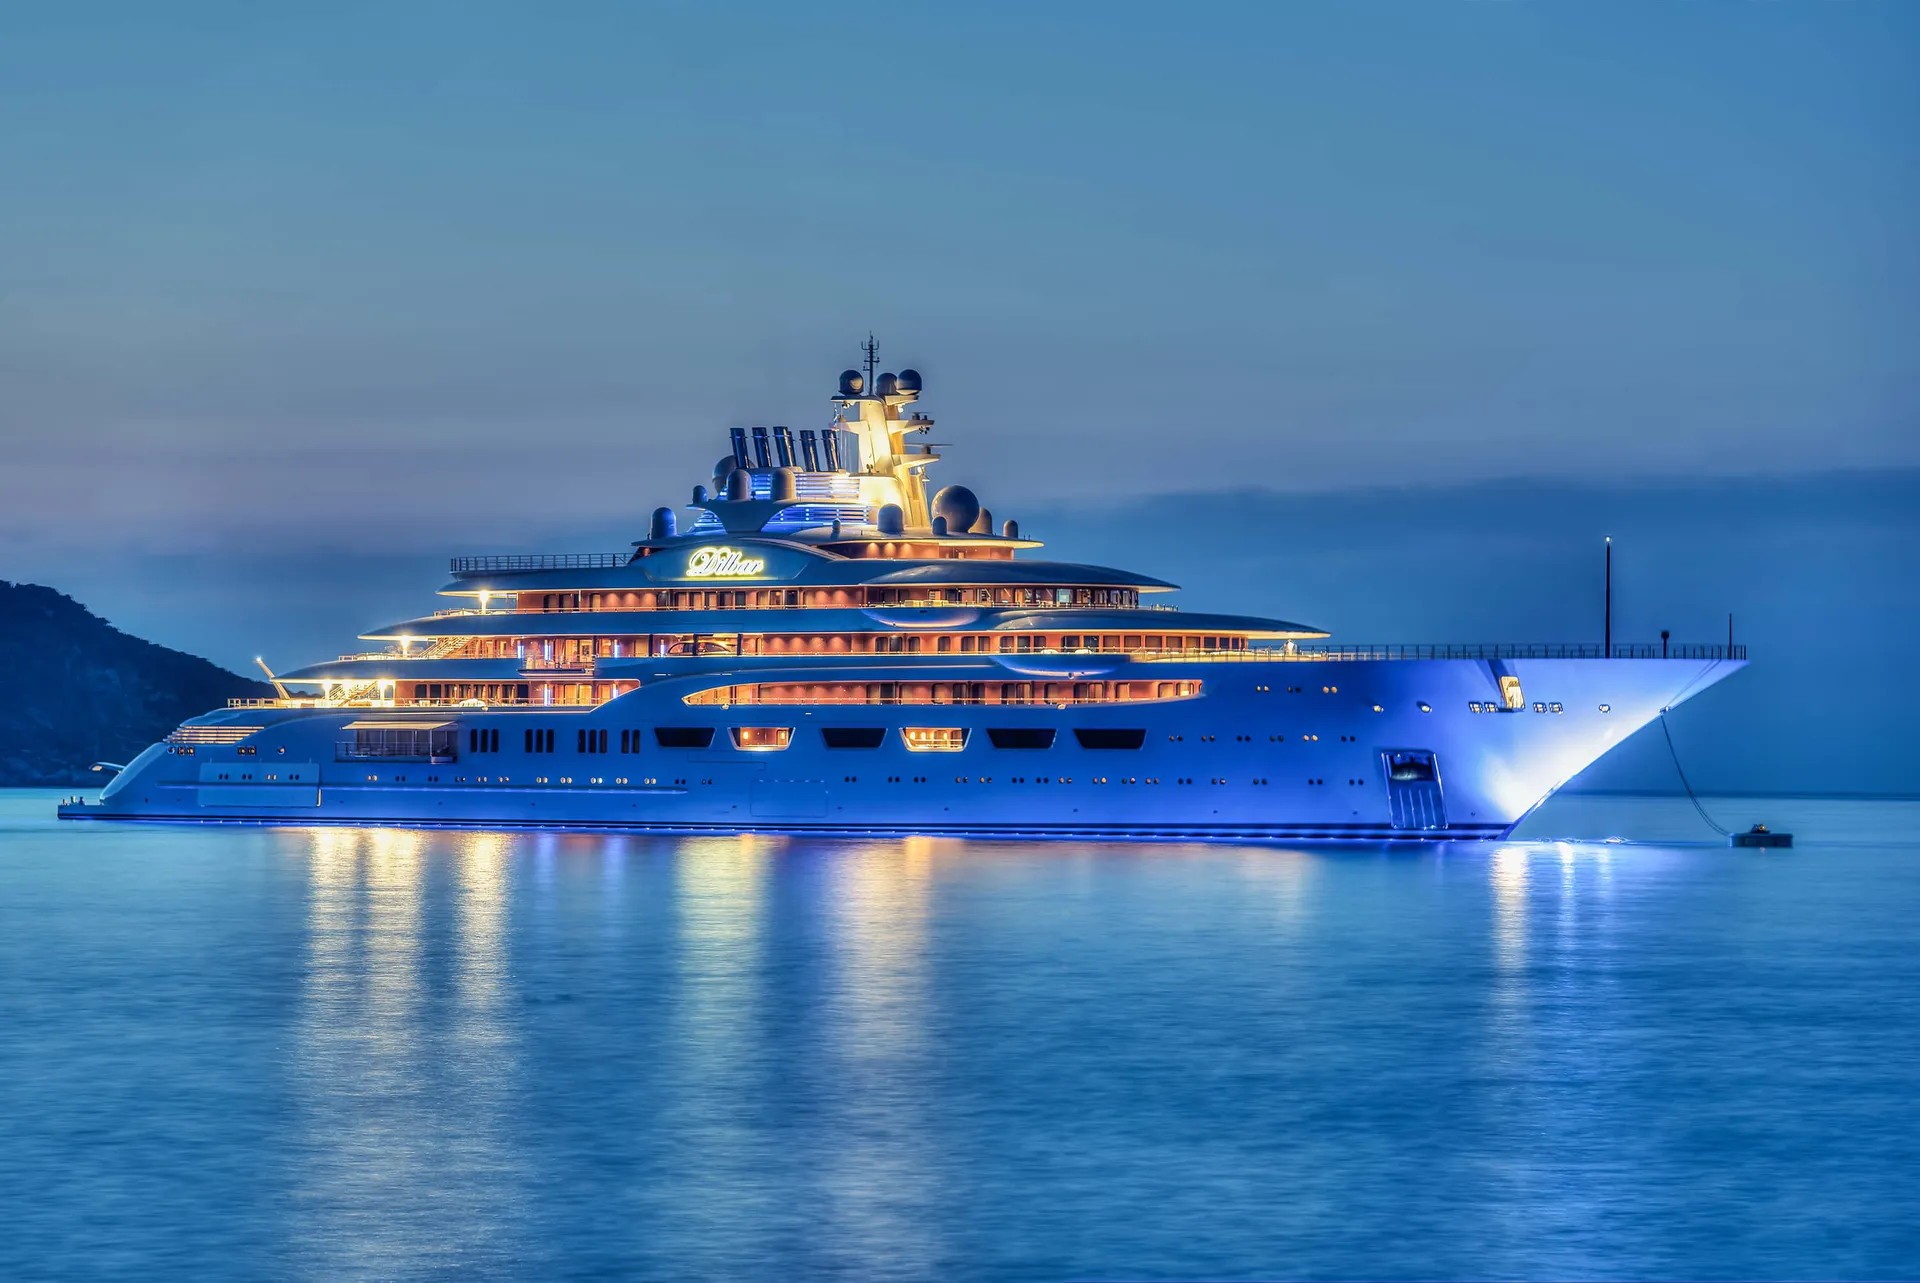 list of largest motor yachts